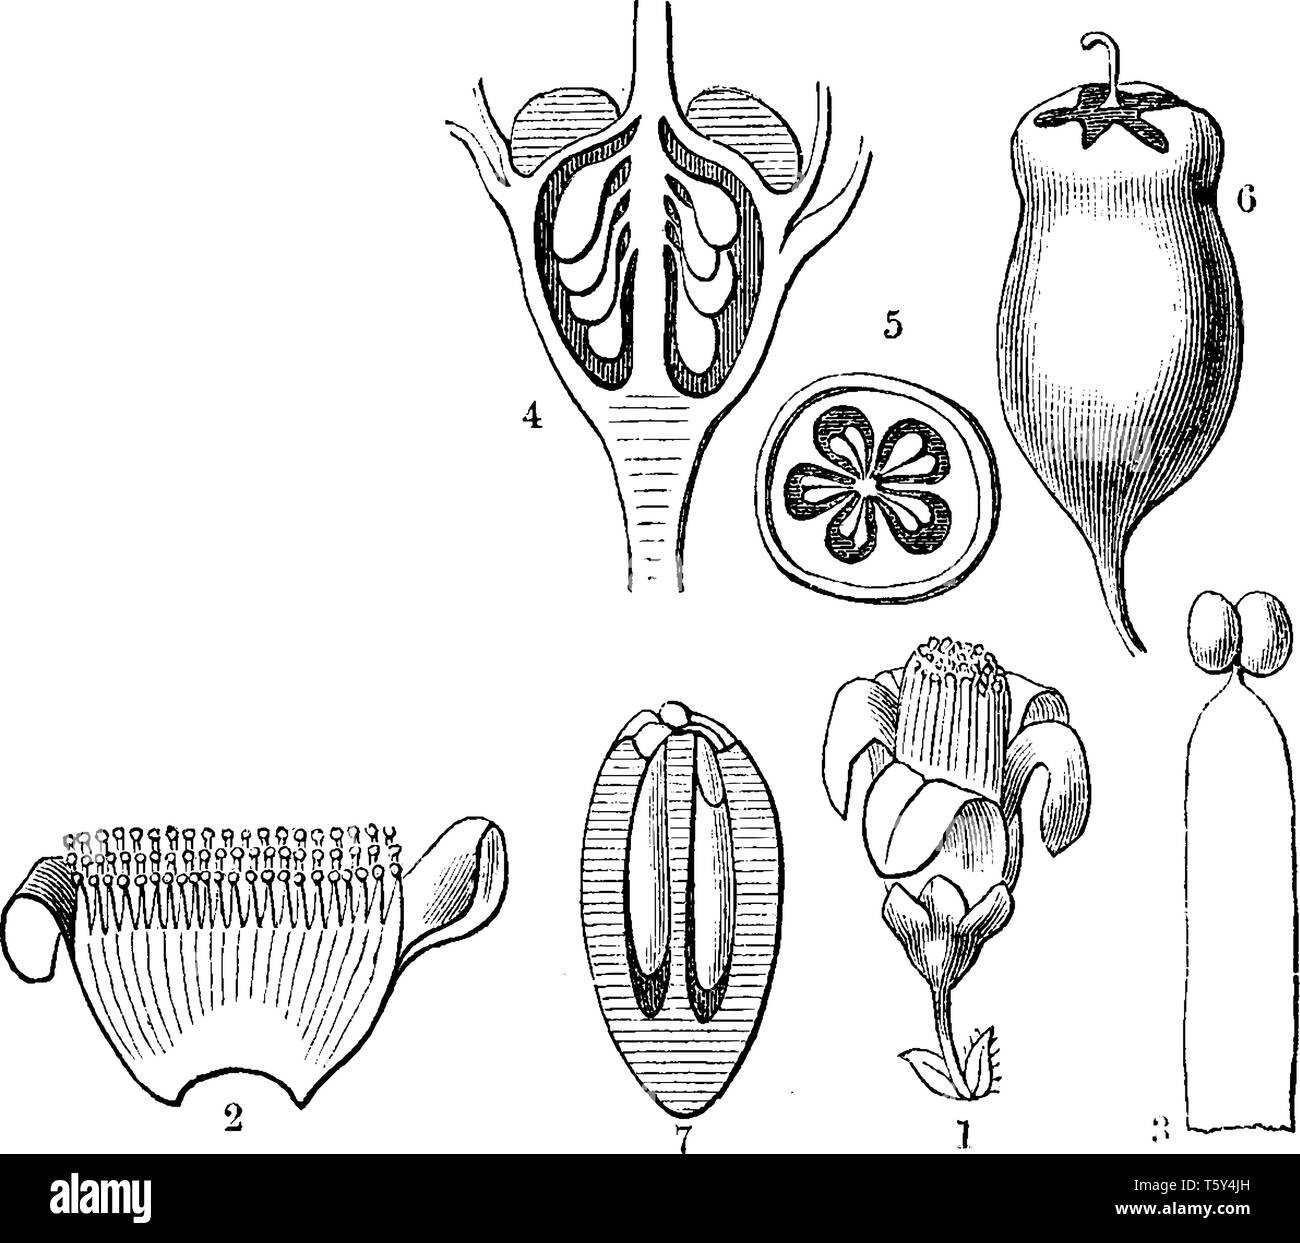 A picture showing different parts of Symplocos Laxiflora tree such as flower, corolla, stamen, ovary, ditto and fruit, vintage line drawing or engravi Stock Vector